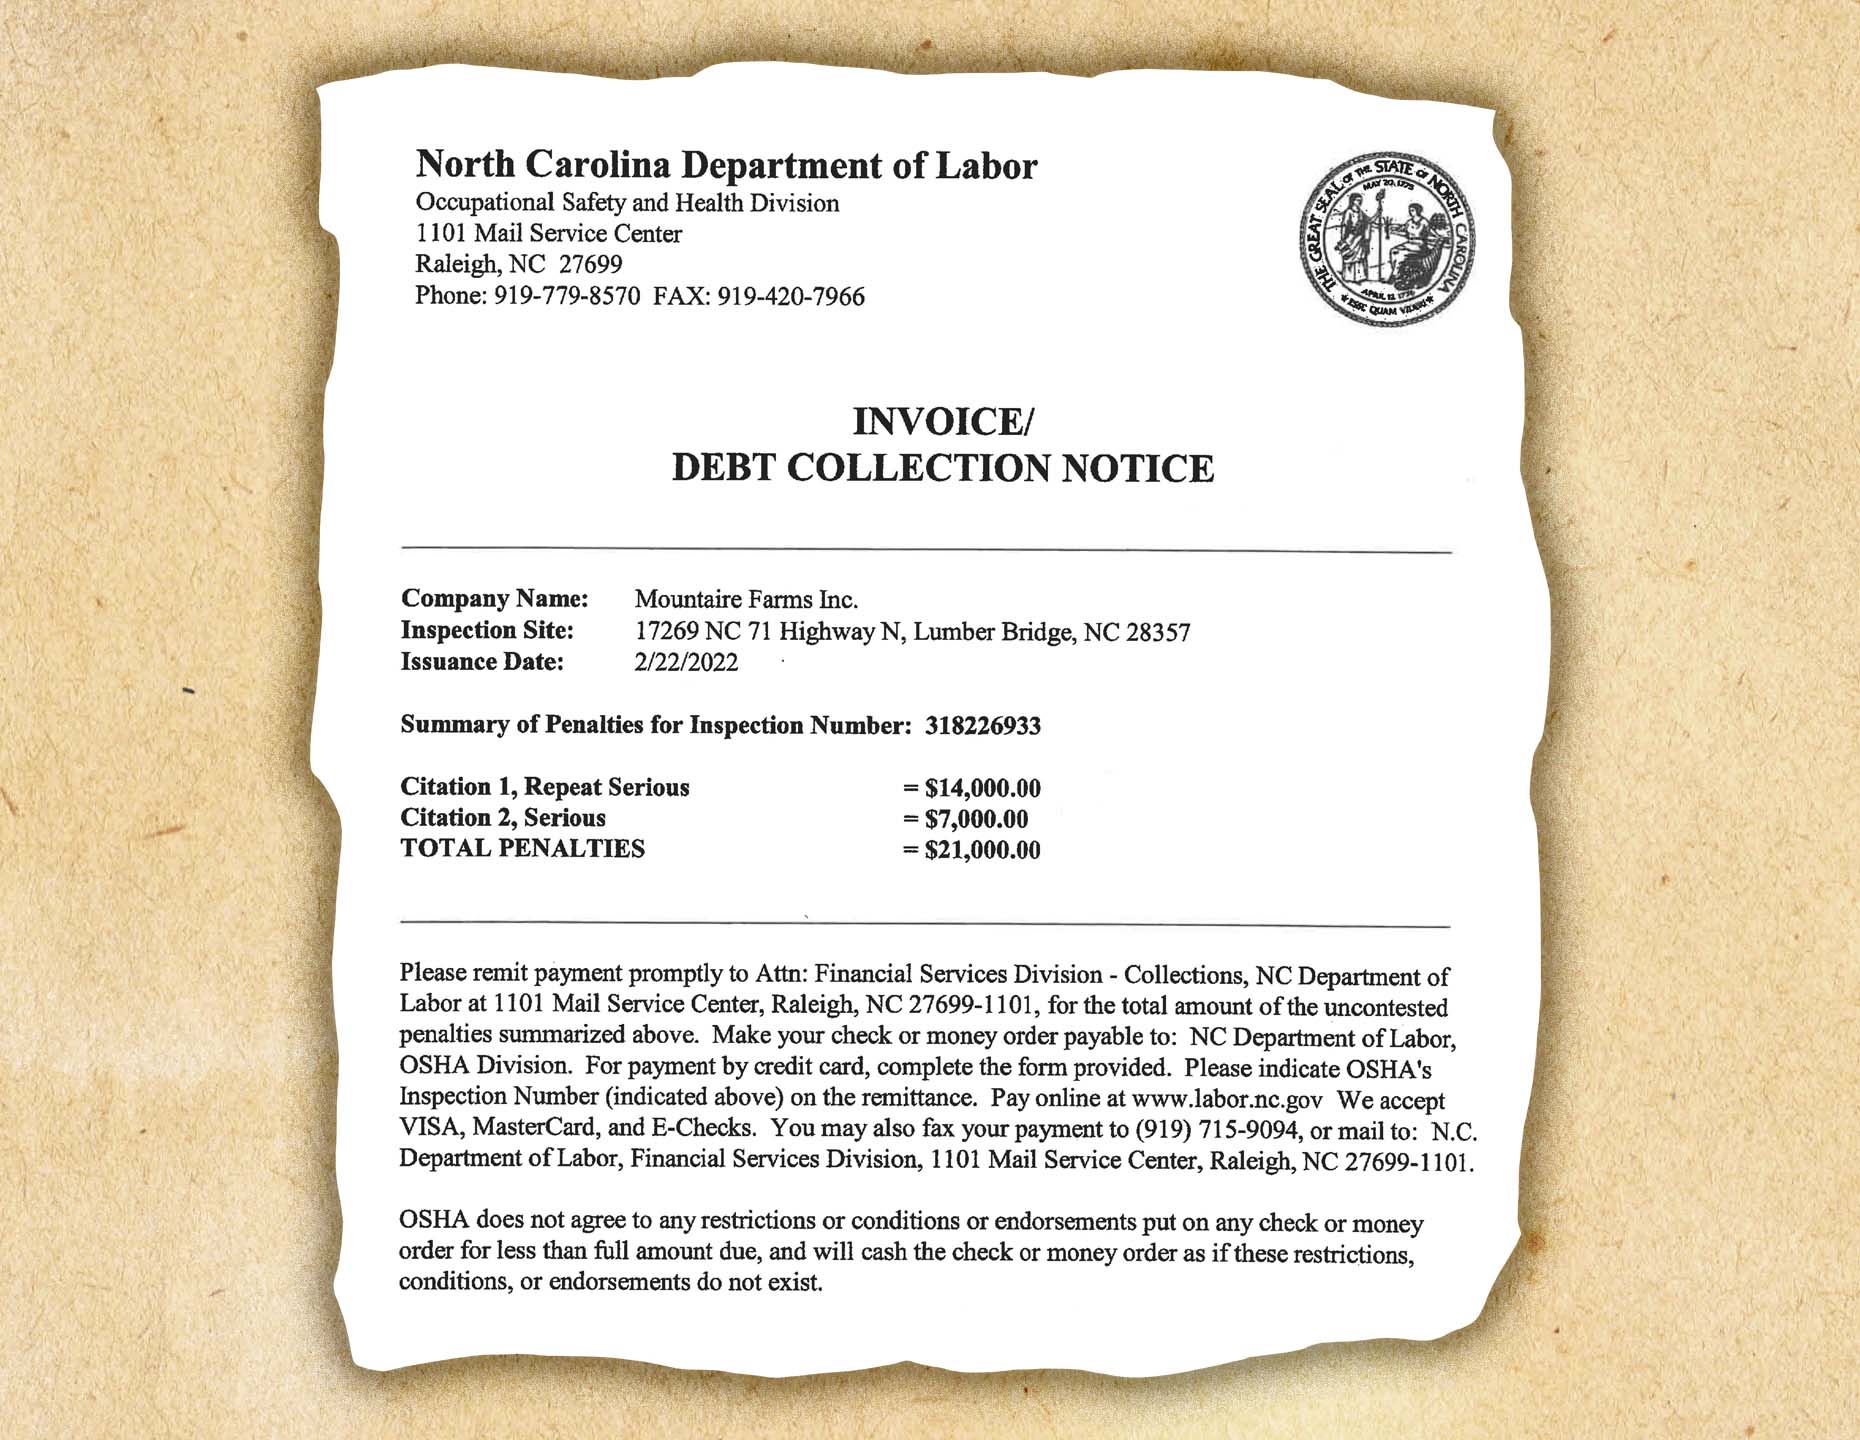 A document cutout from the North Carolina Department of Labor, Occupational Safety and Health Division. An invoice to Mountaire Farms Inc. on penalties for inspections. March 2022